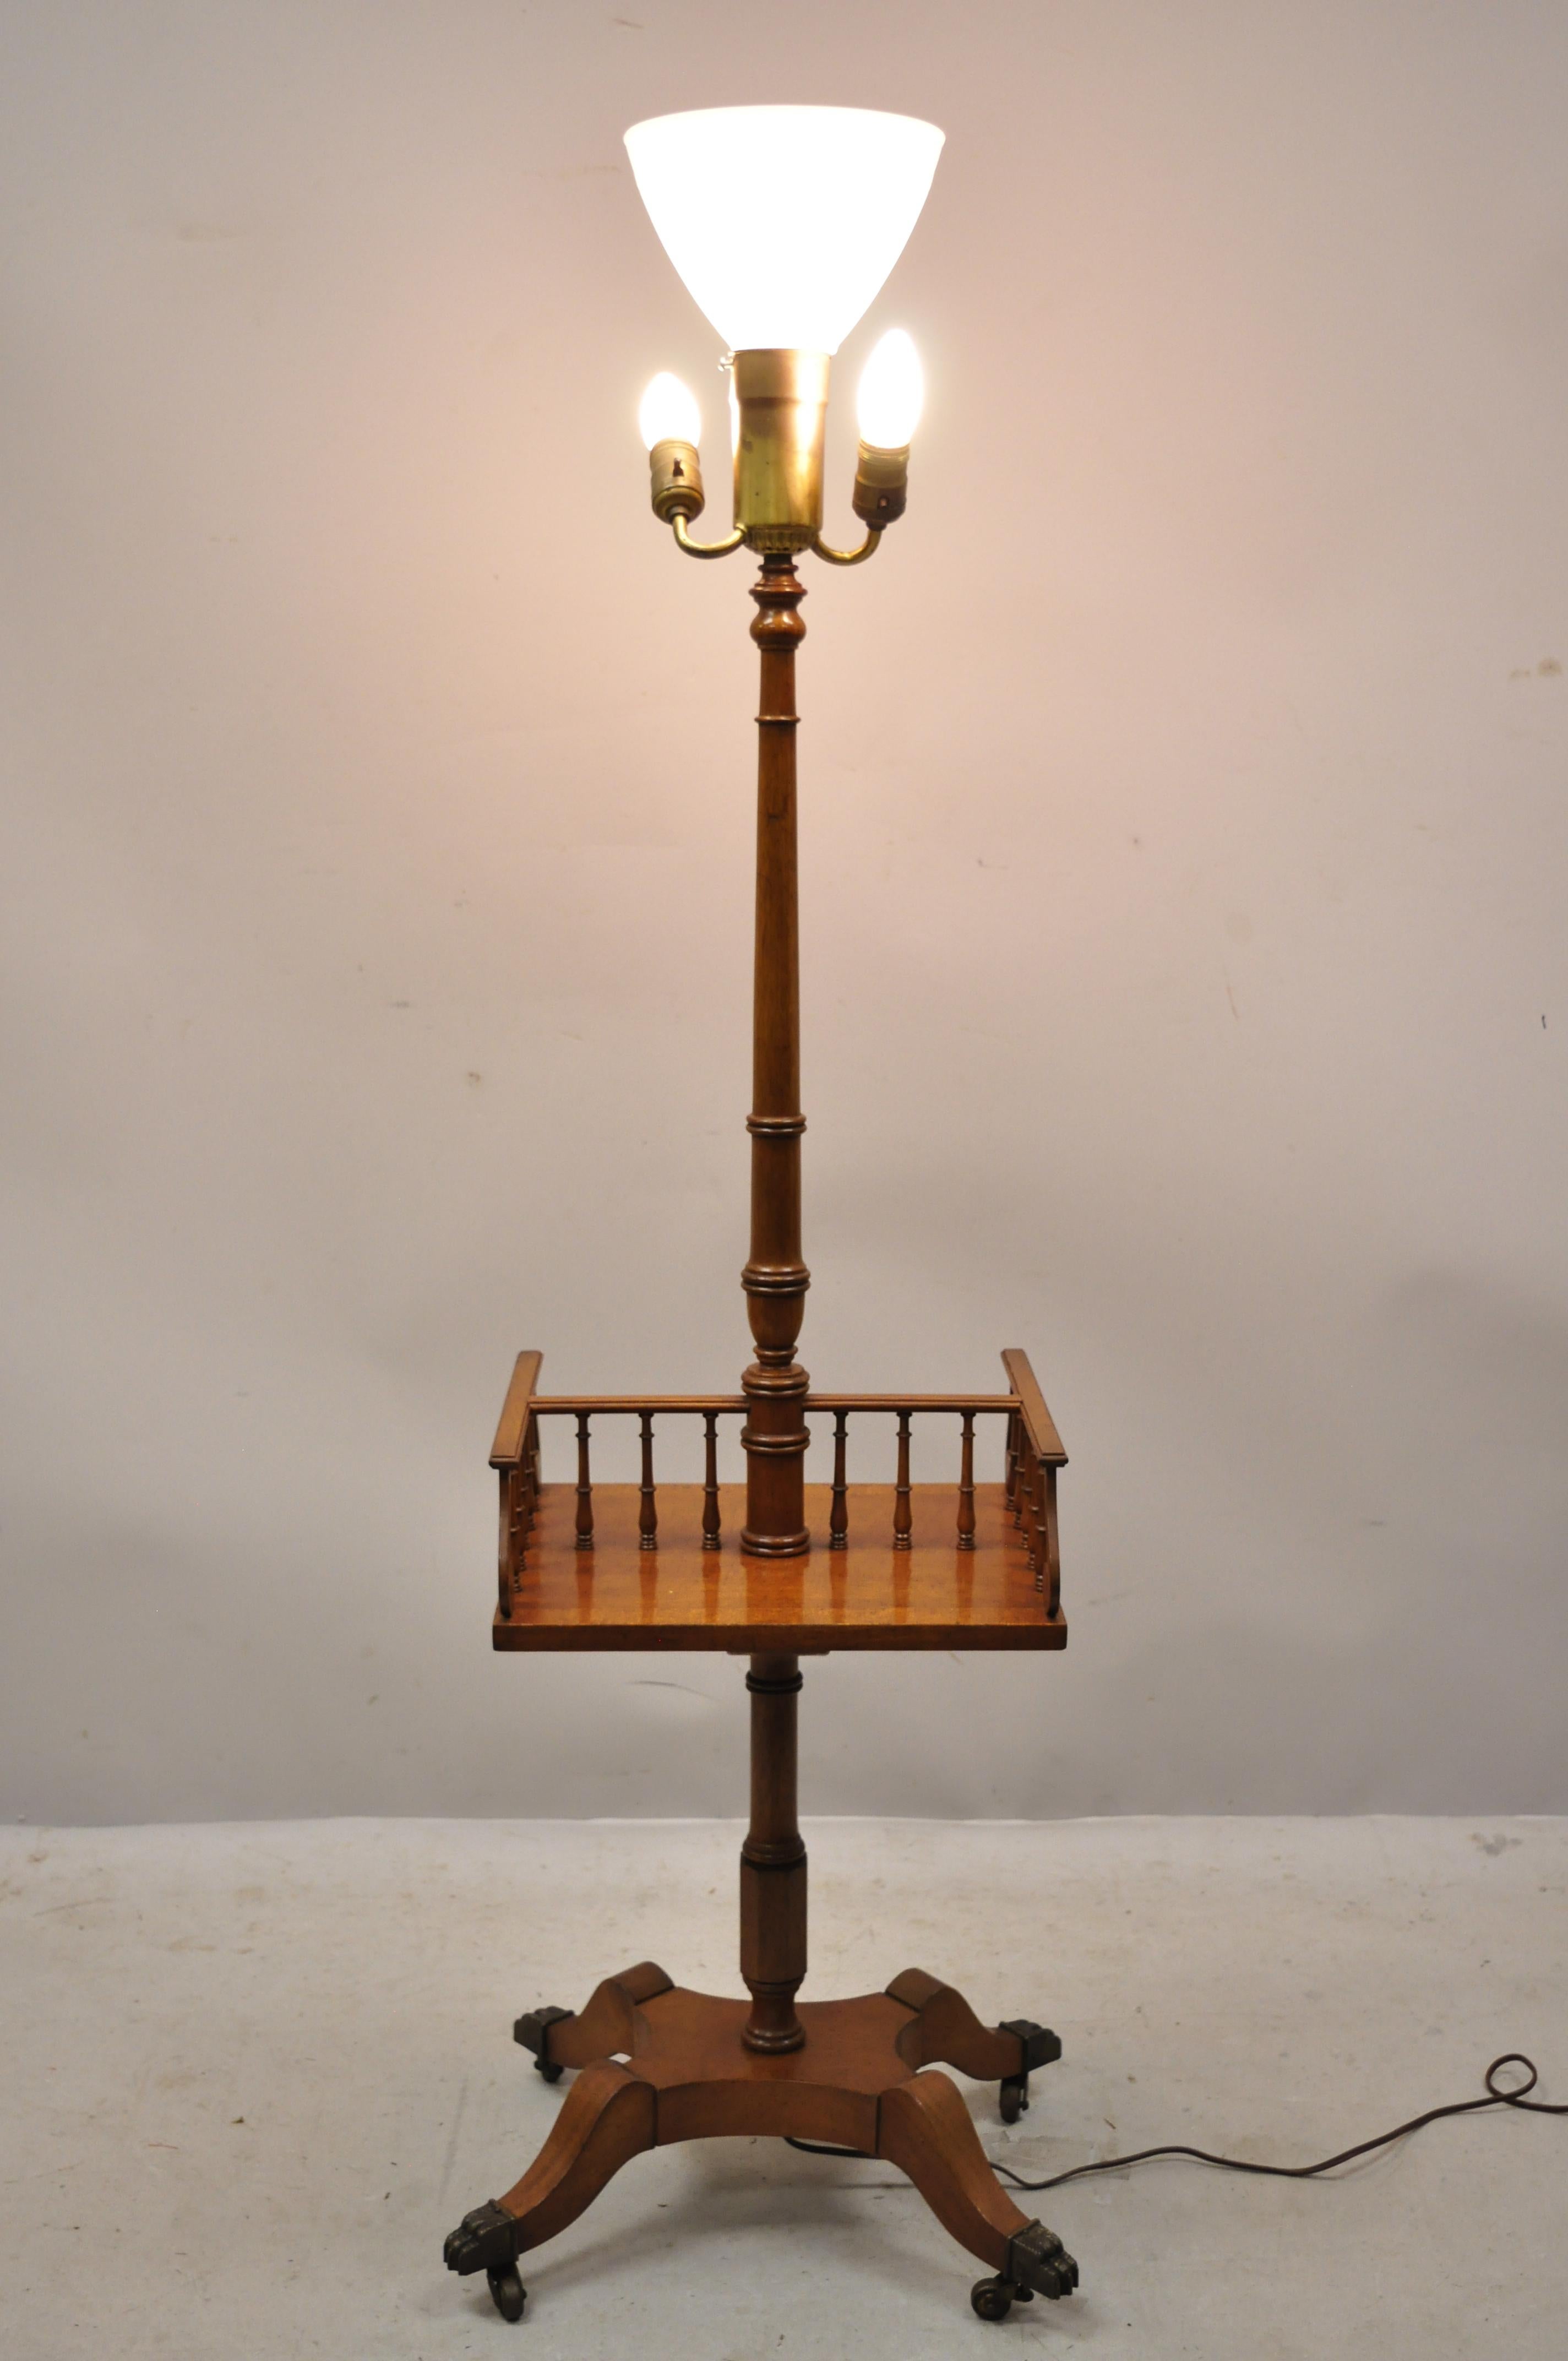 Vintage English Regency style mahogany floor table lamp with carved harp gallery. Item features brass paw feet and rolling casters, carved 